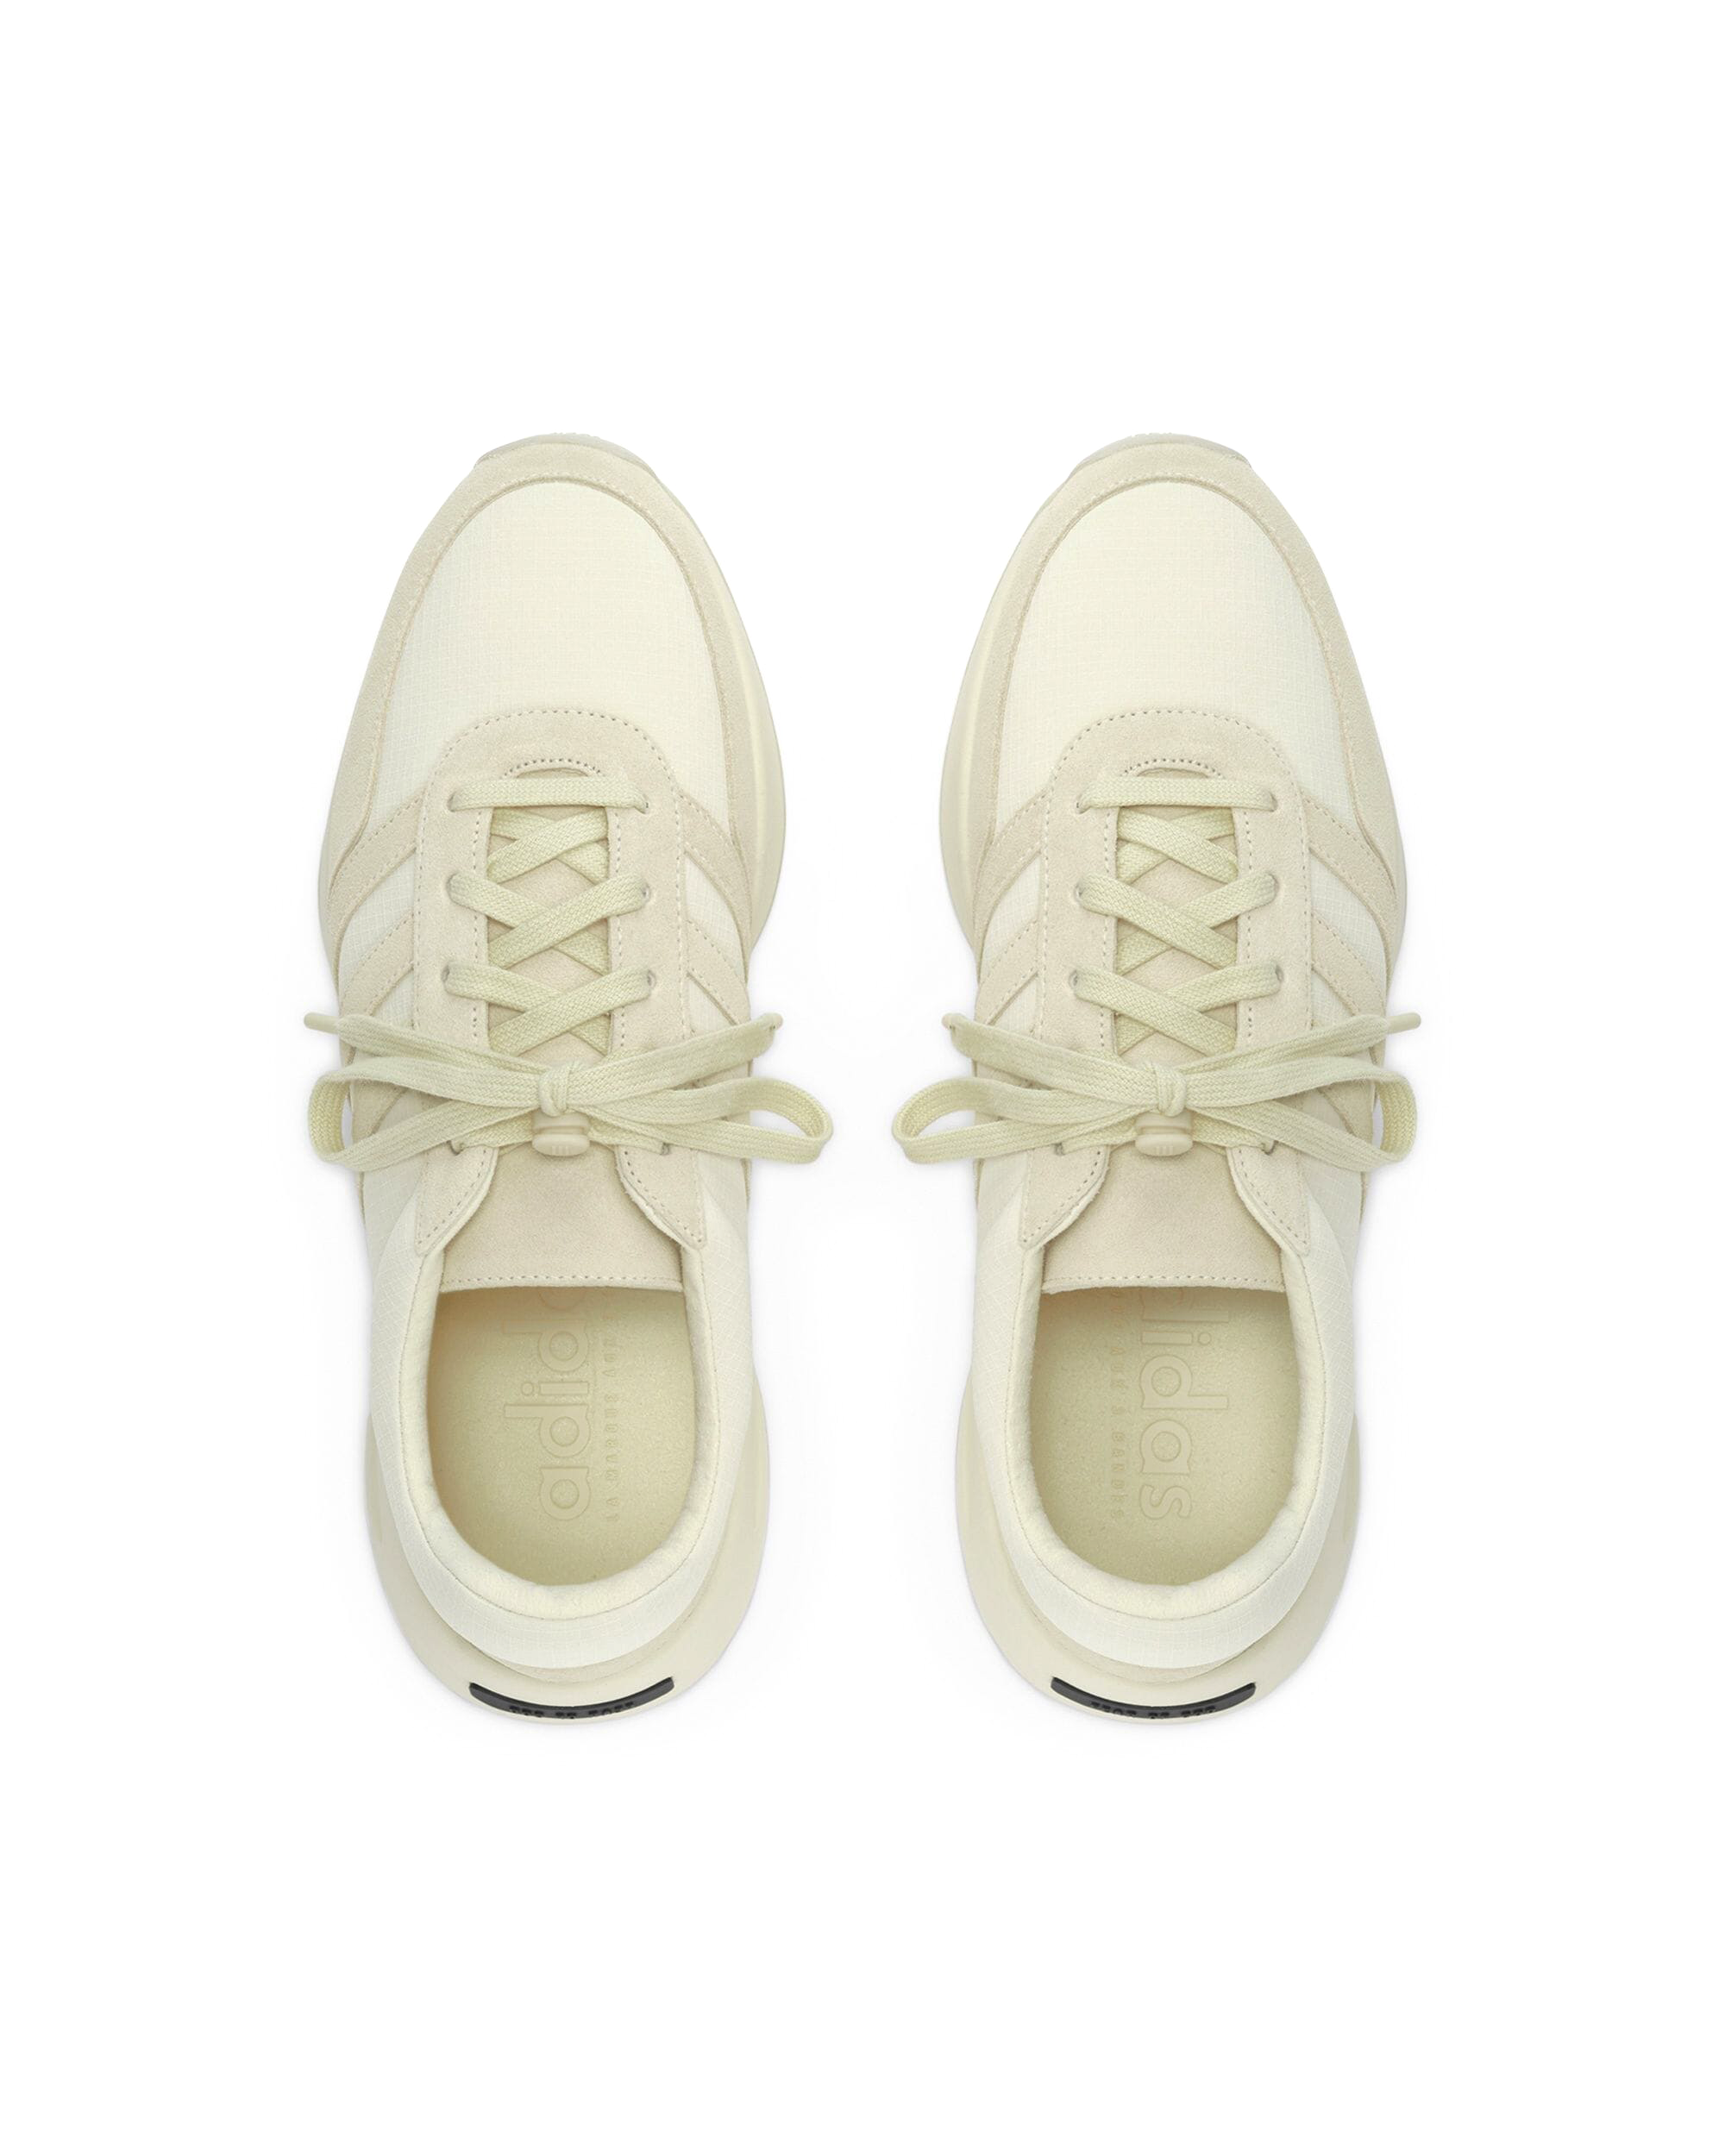 Fear of God Athletics Los Angeles - Pale Yellow / Pale Yellow